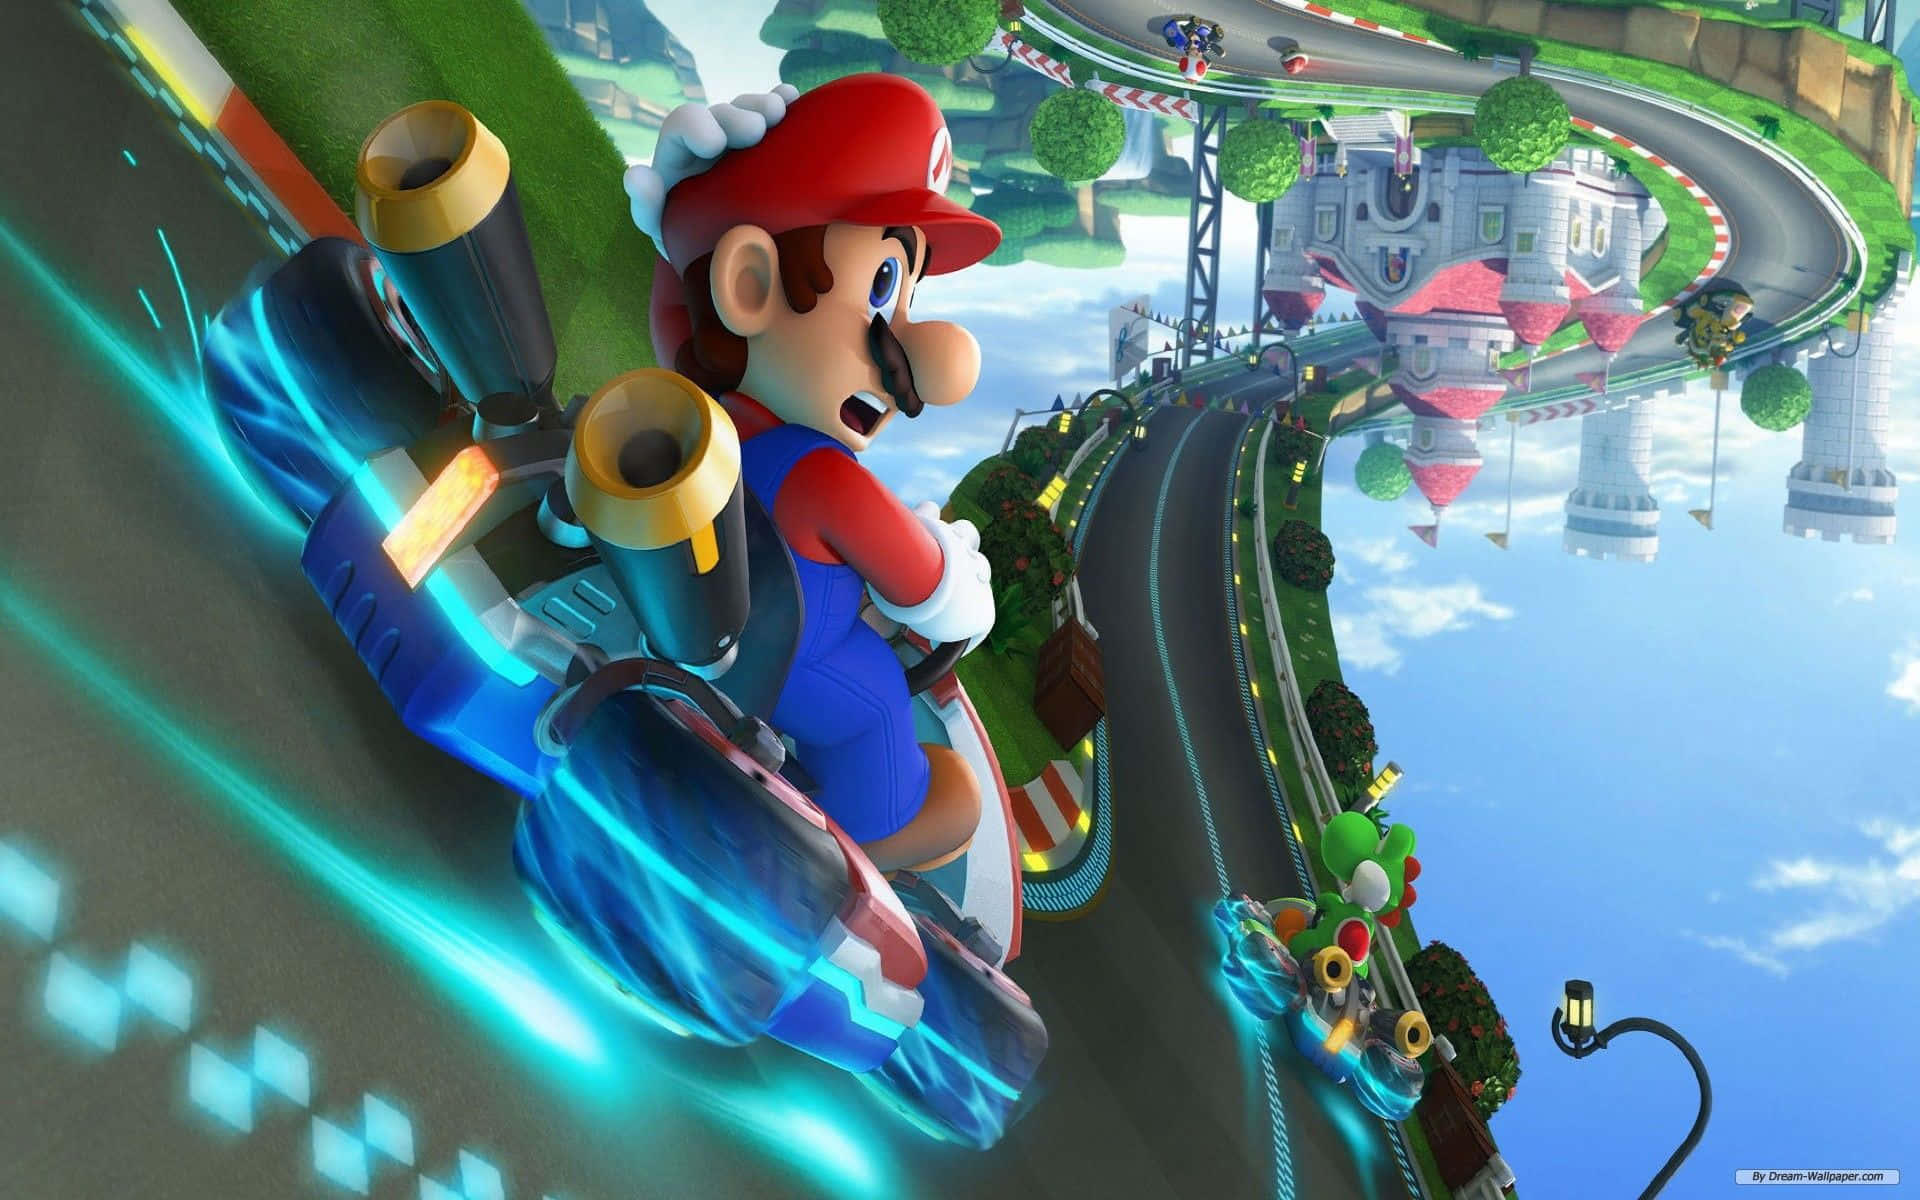 Race on to Victory with Mario Kart